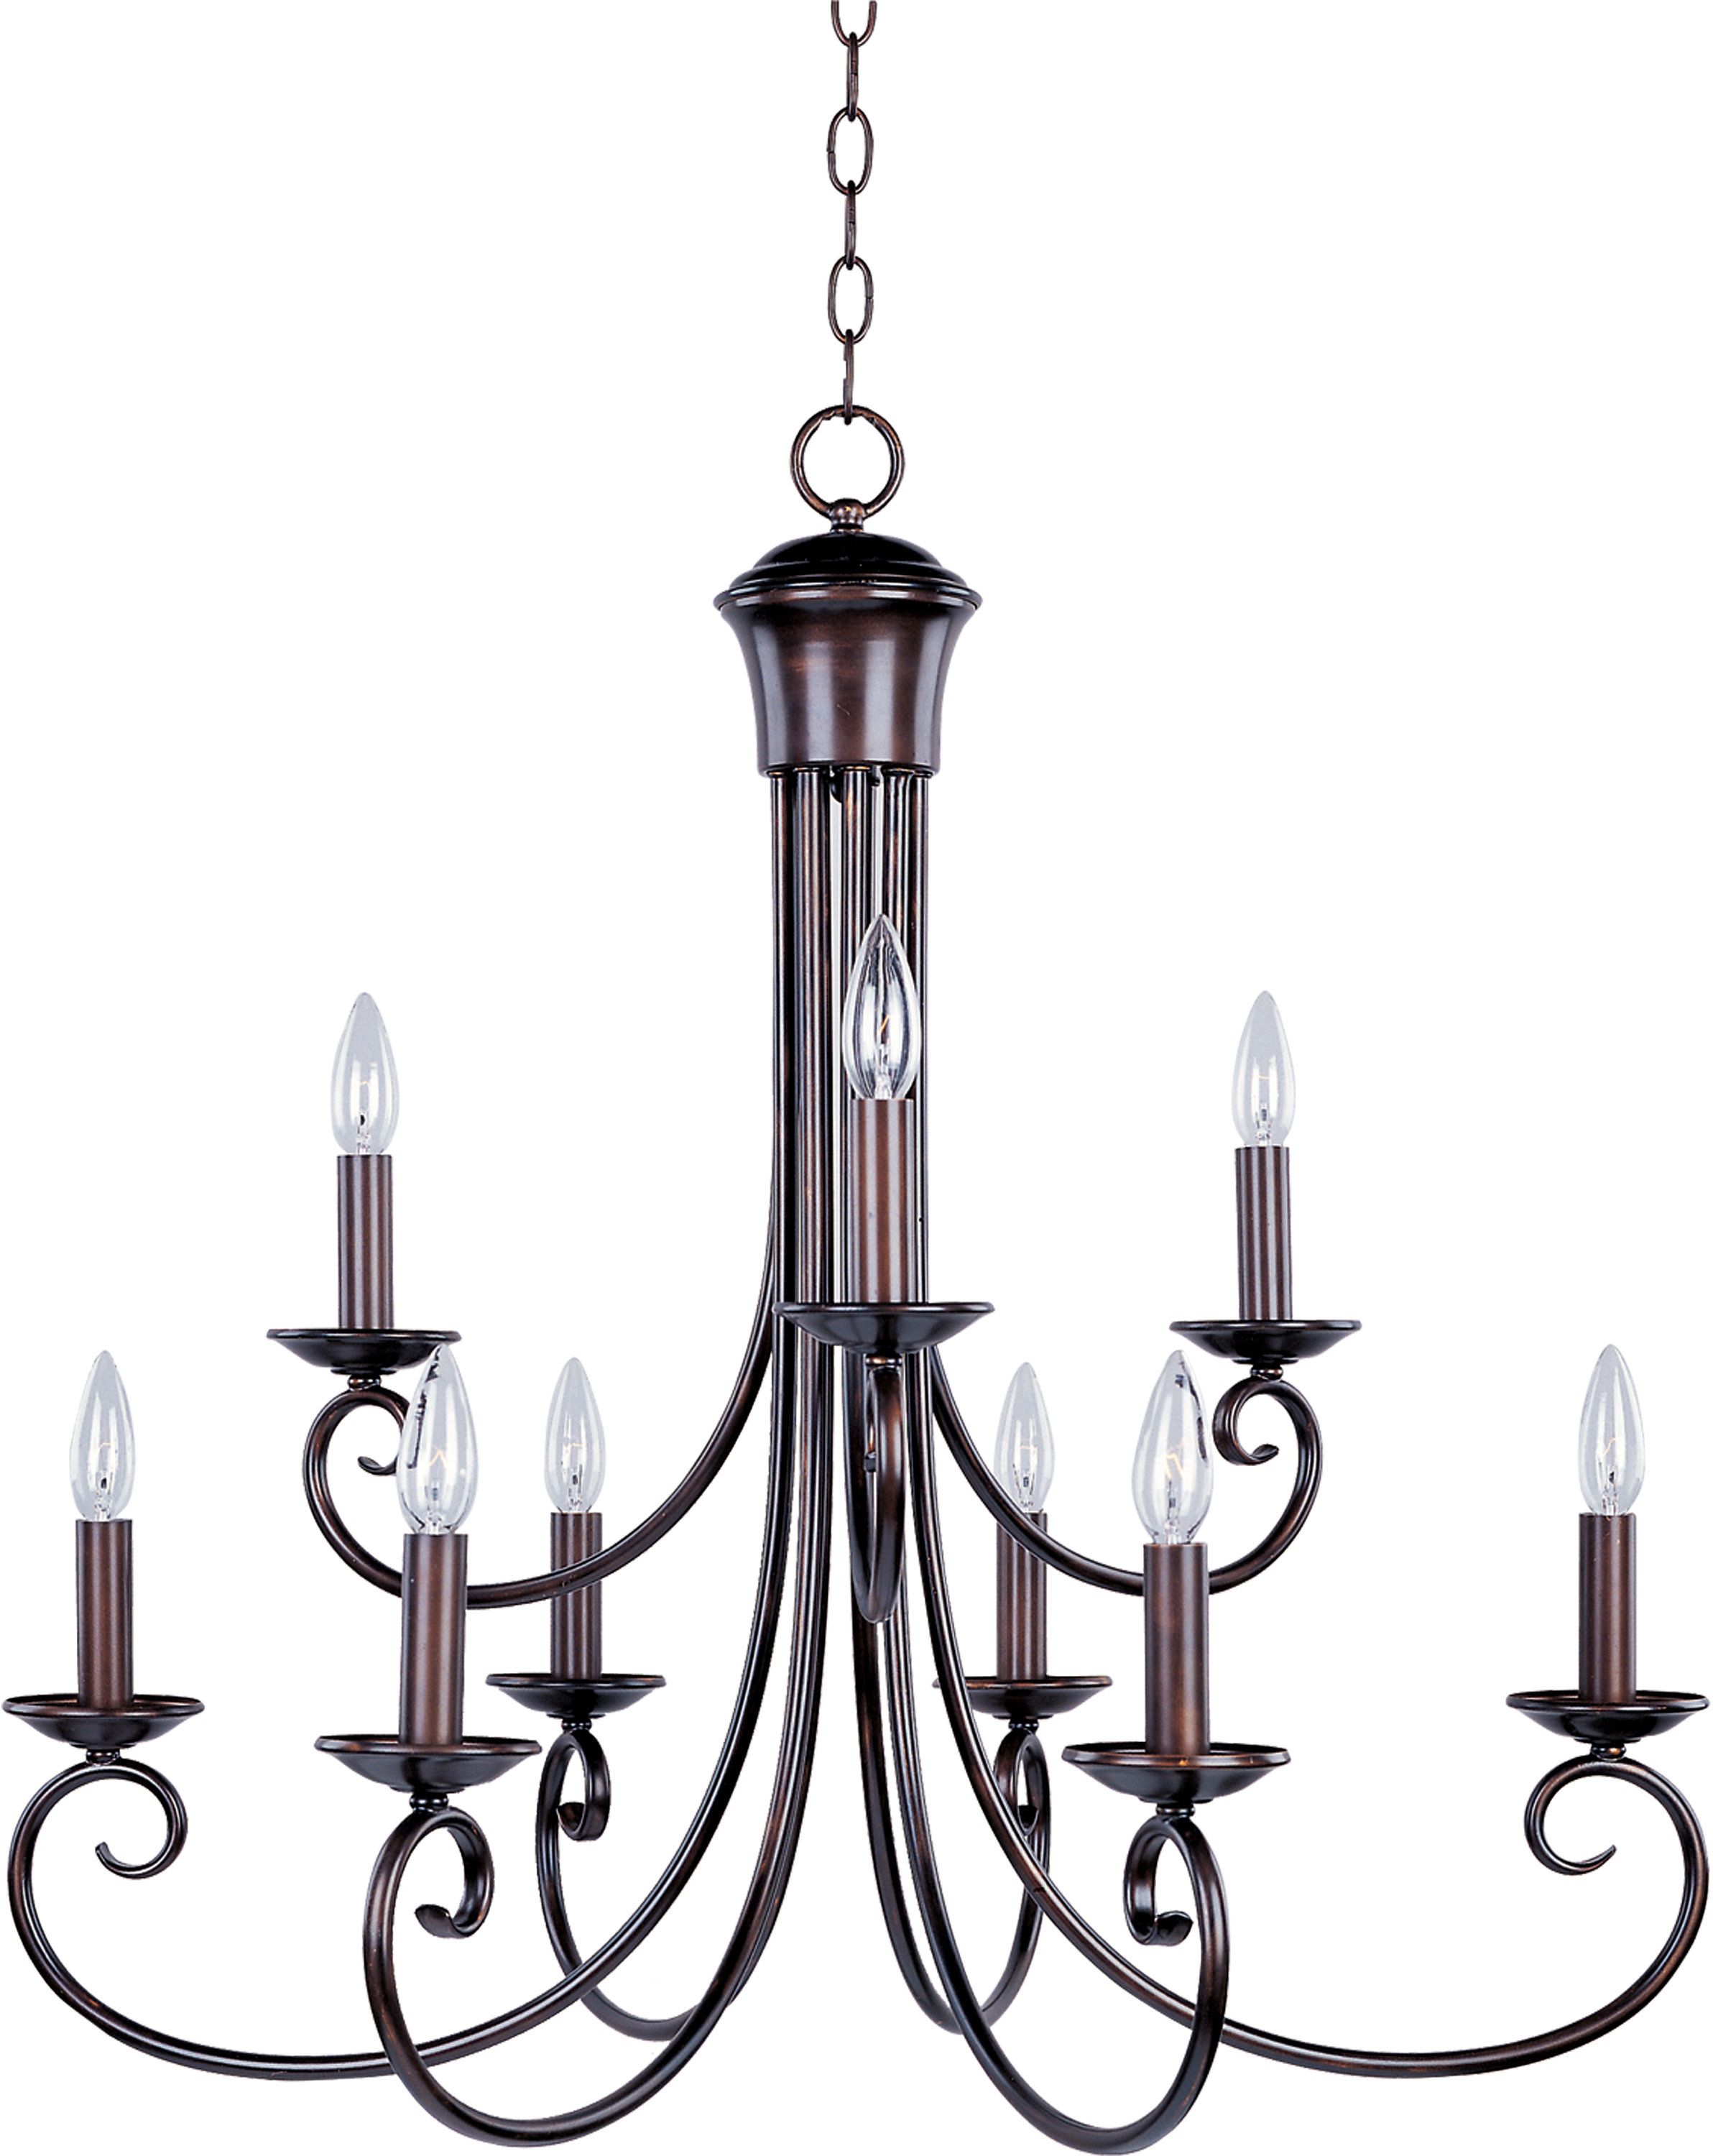 Kenedy 9 Light Candle Style Chandelier With Regard To Giverny 9 Light Candle Style Chandeliers (View 2 of 30)